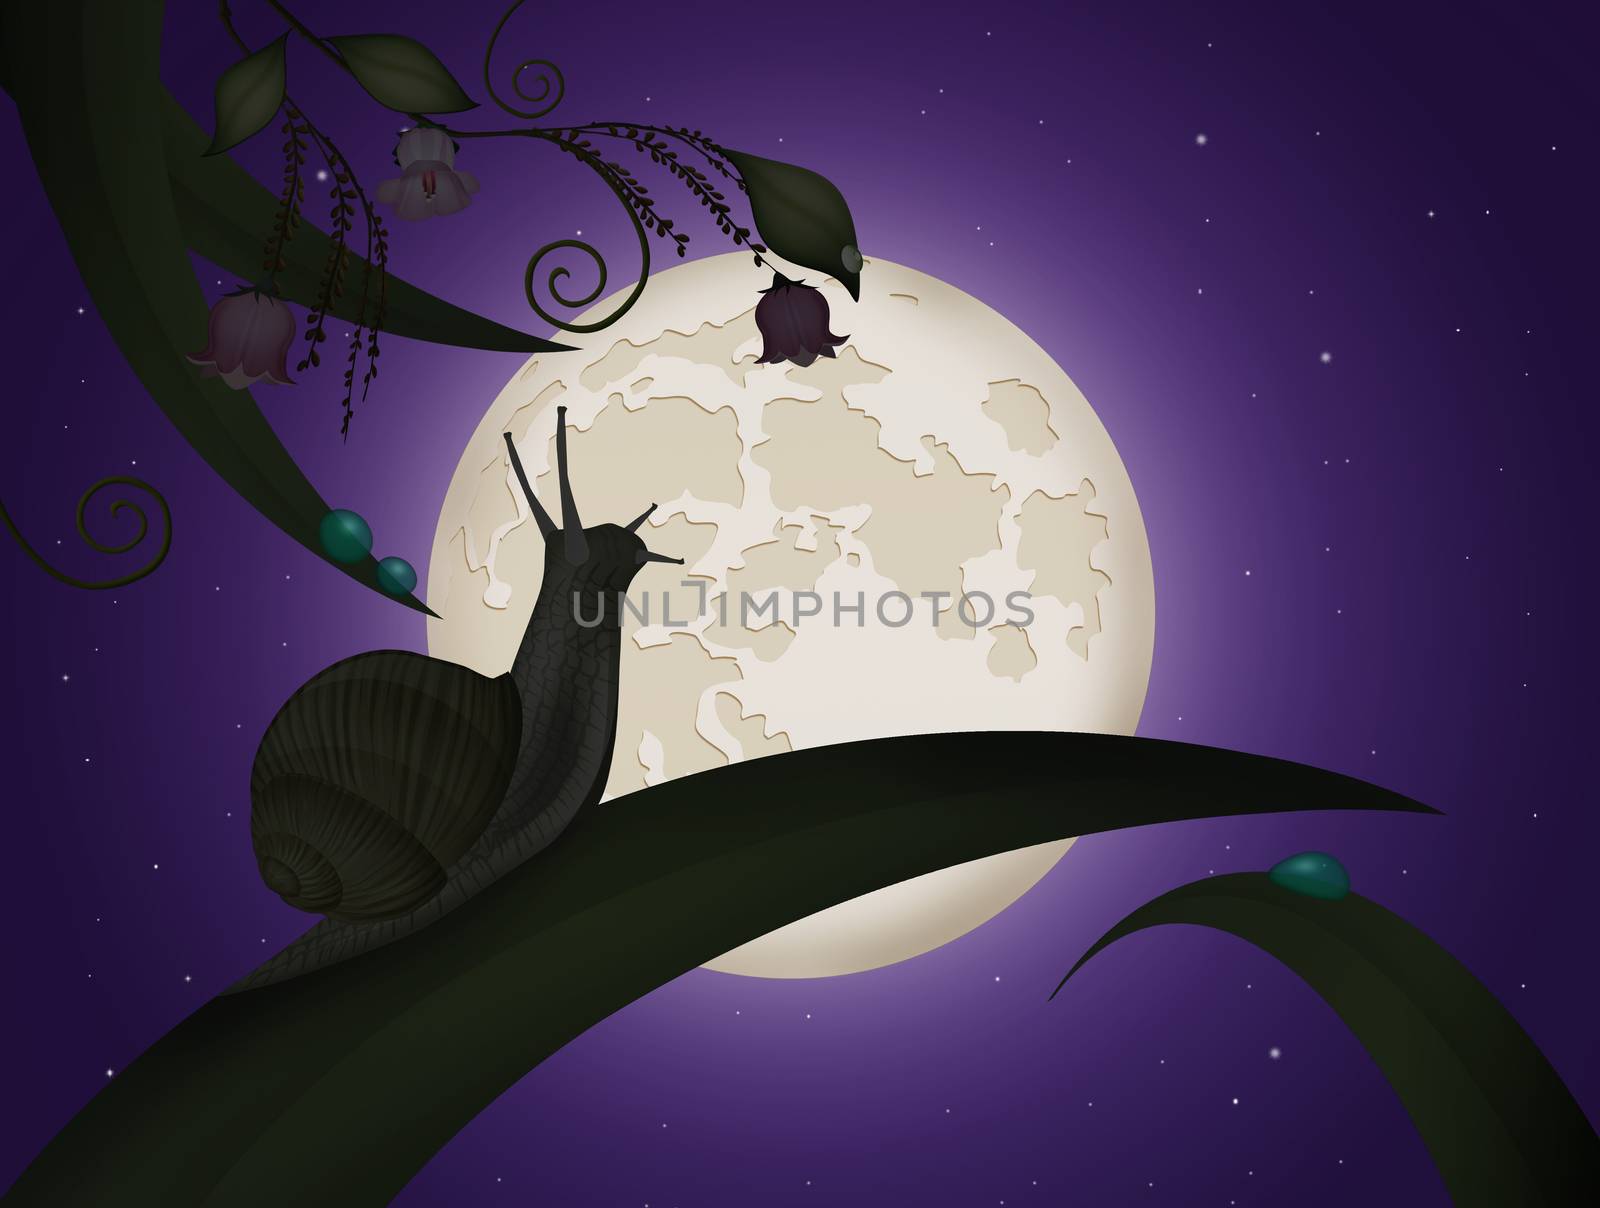 snail on leaf in the moonlight by adrenalina